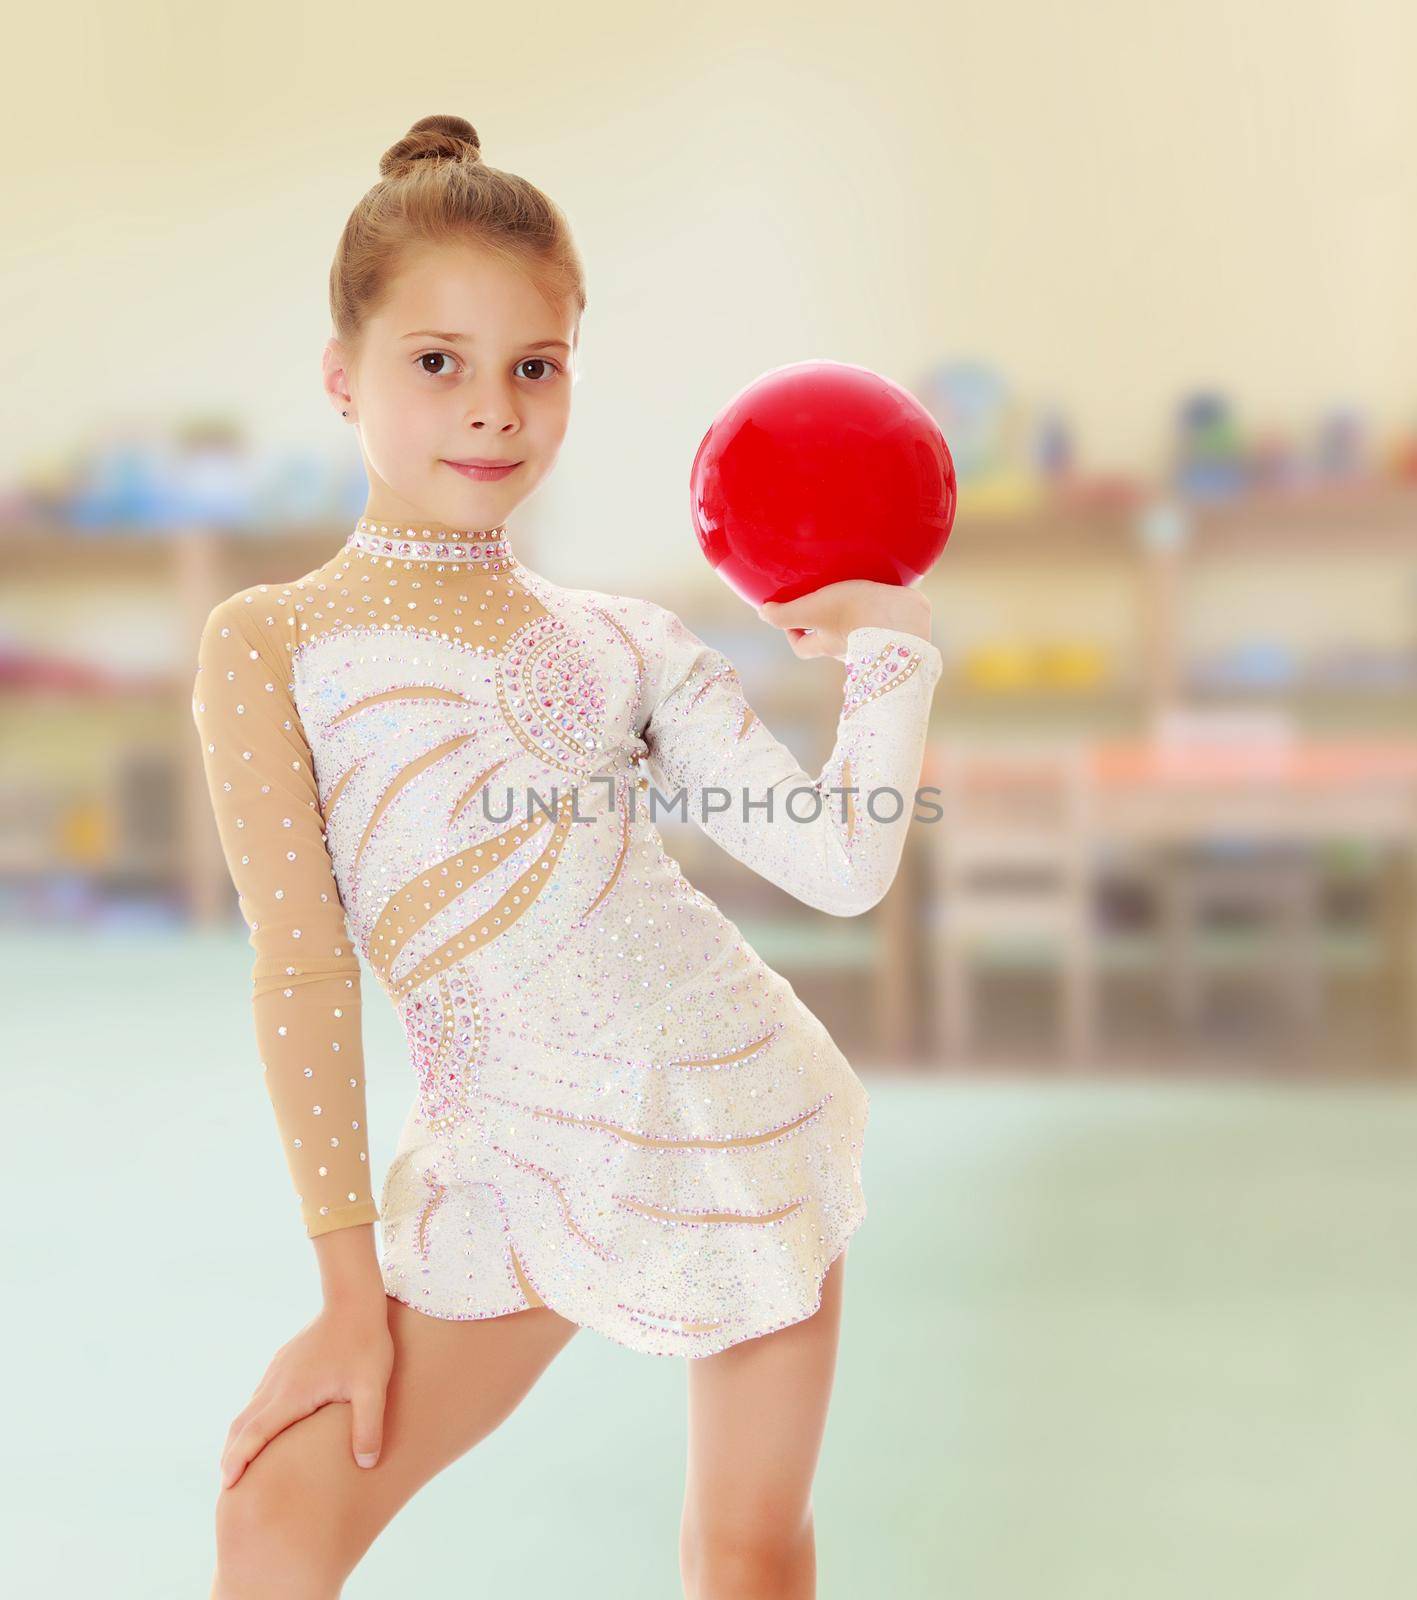 Against the background of a child's room .Beautiful little girl gymnast in elegant dress, posing with a red ball.